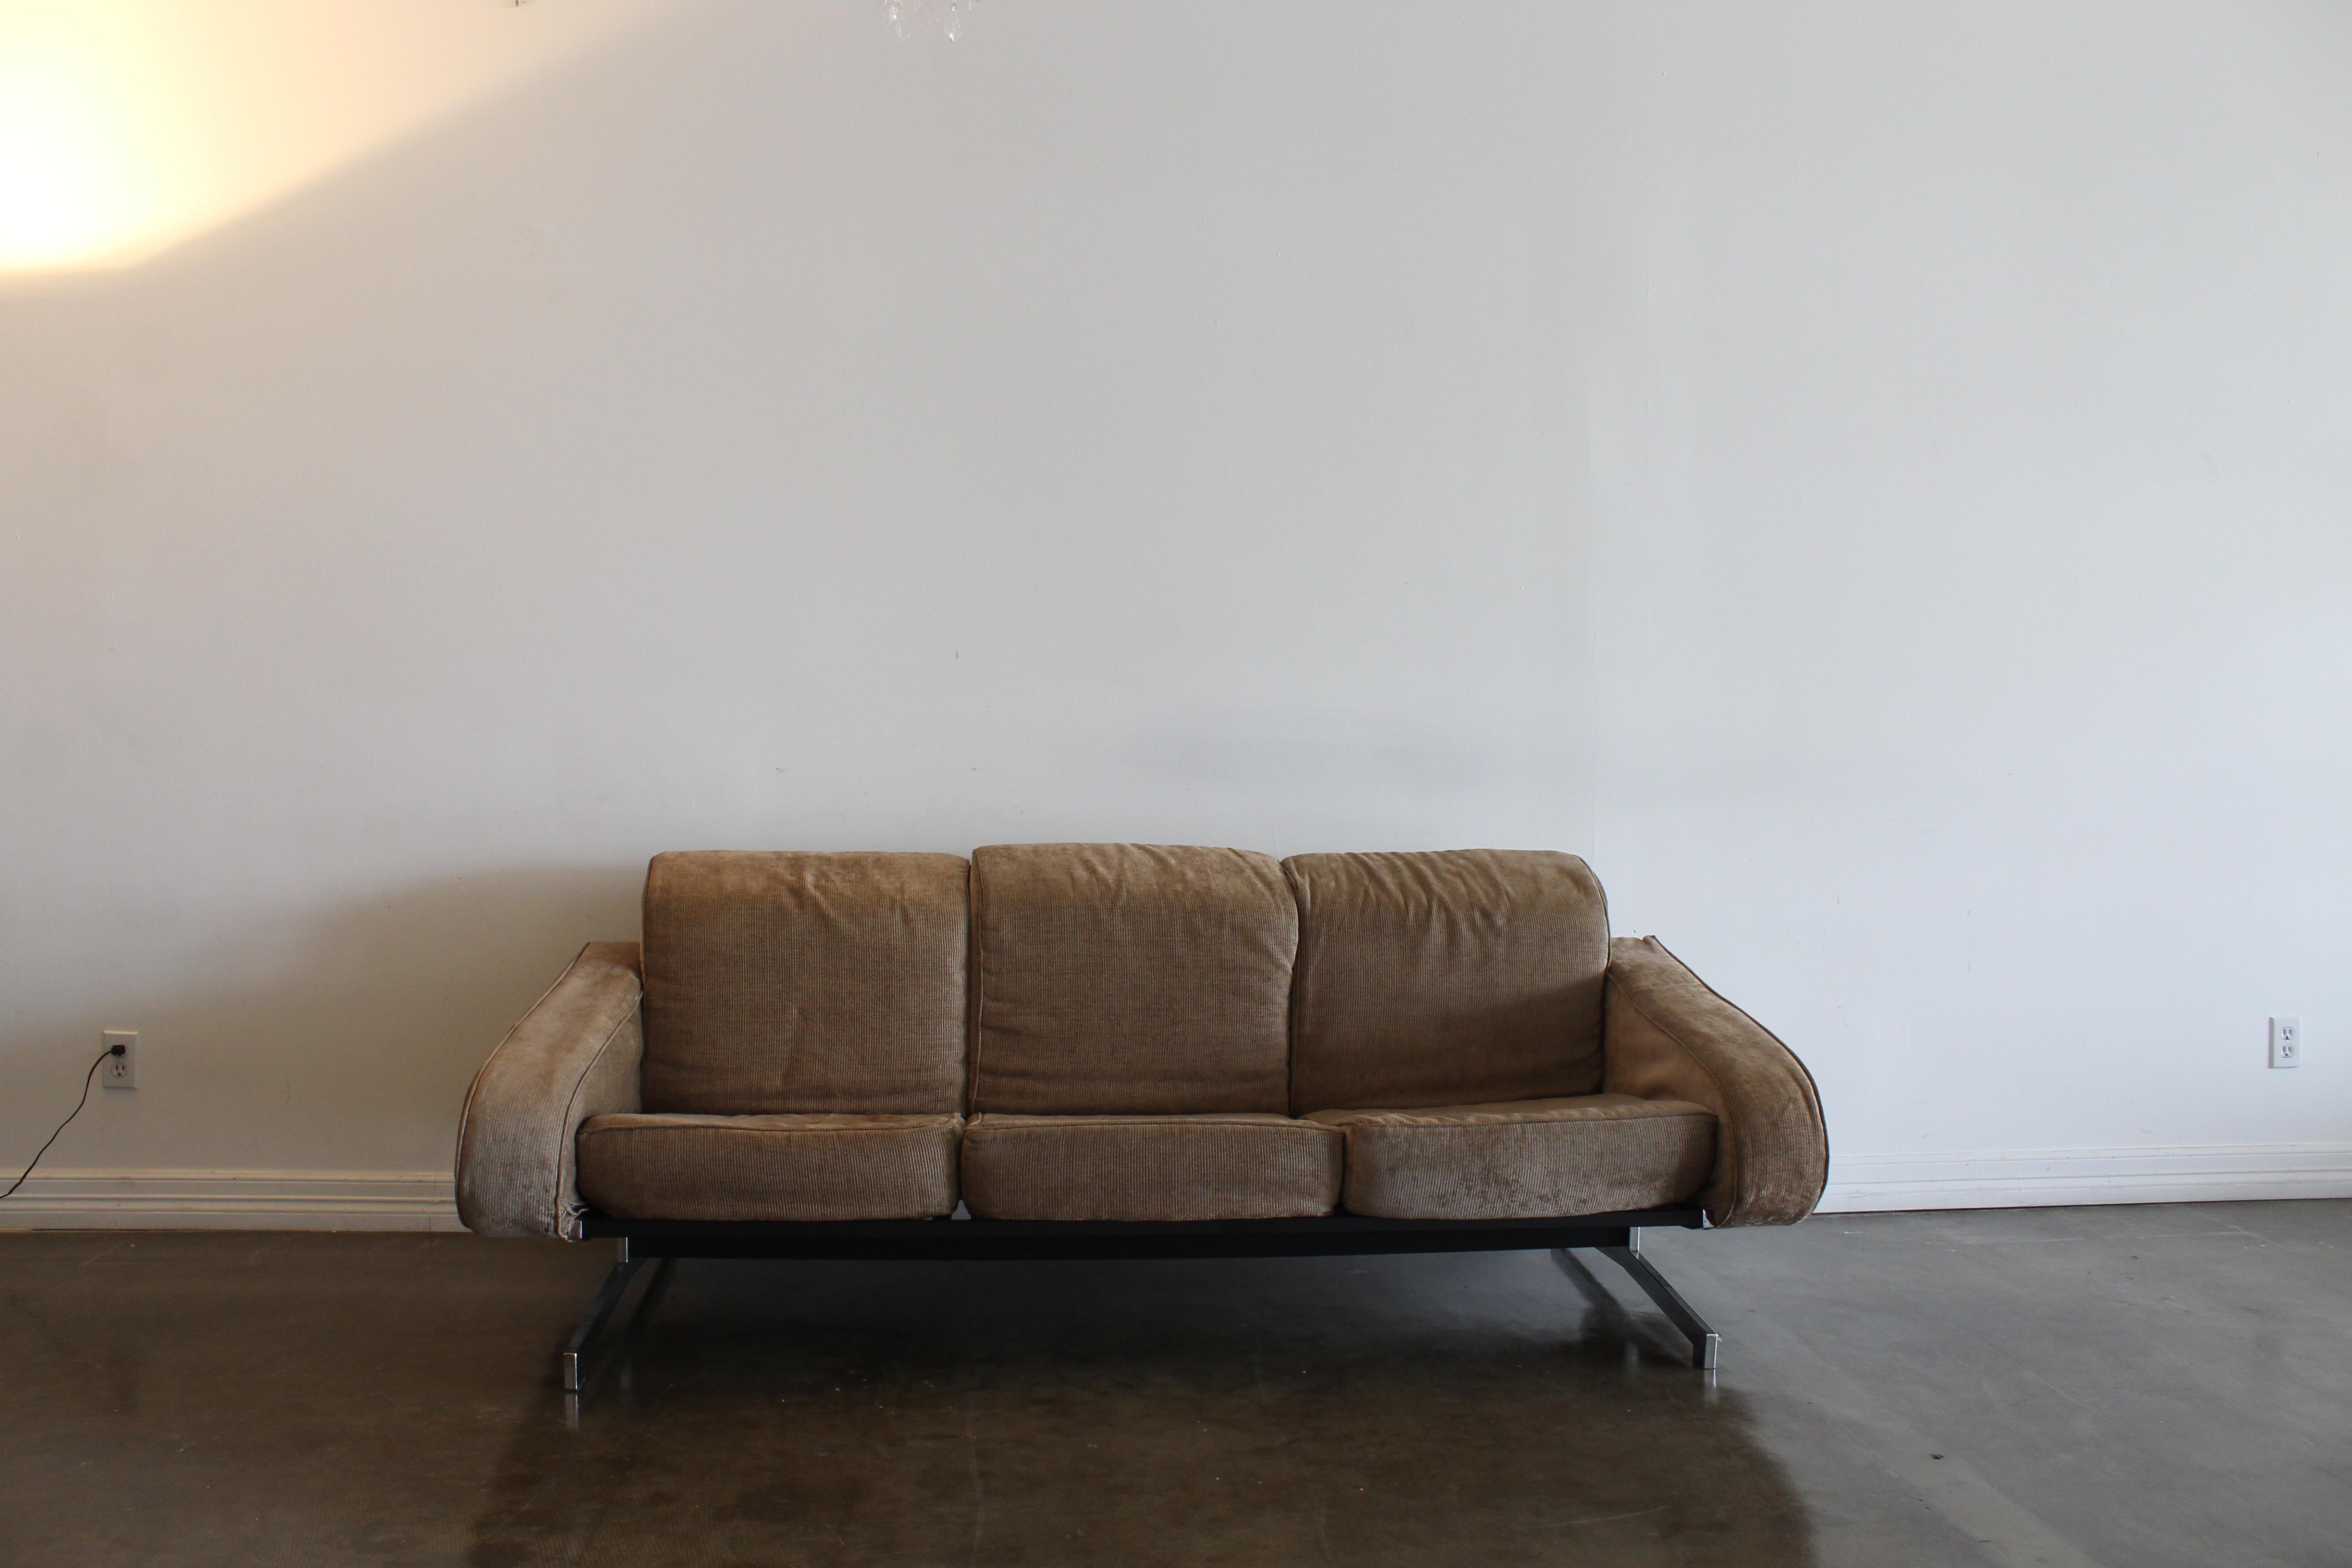 Cool 70s style sofa in a tan corduroy fabric. Also has a matching lounge chair!